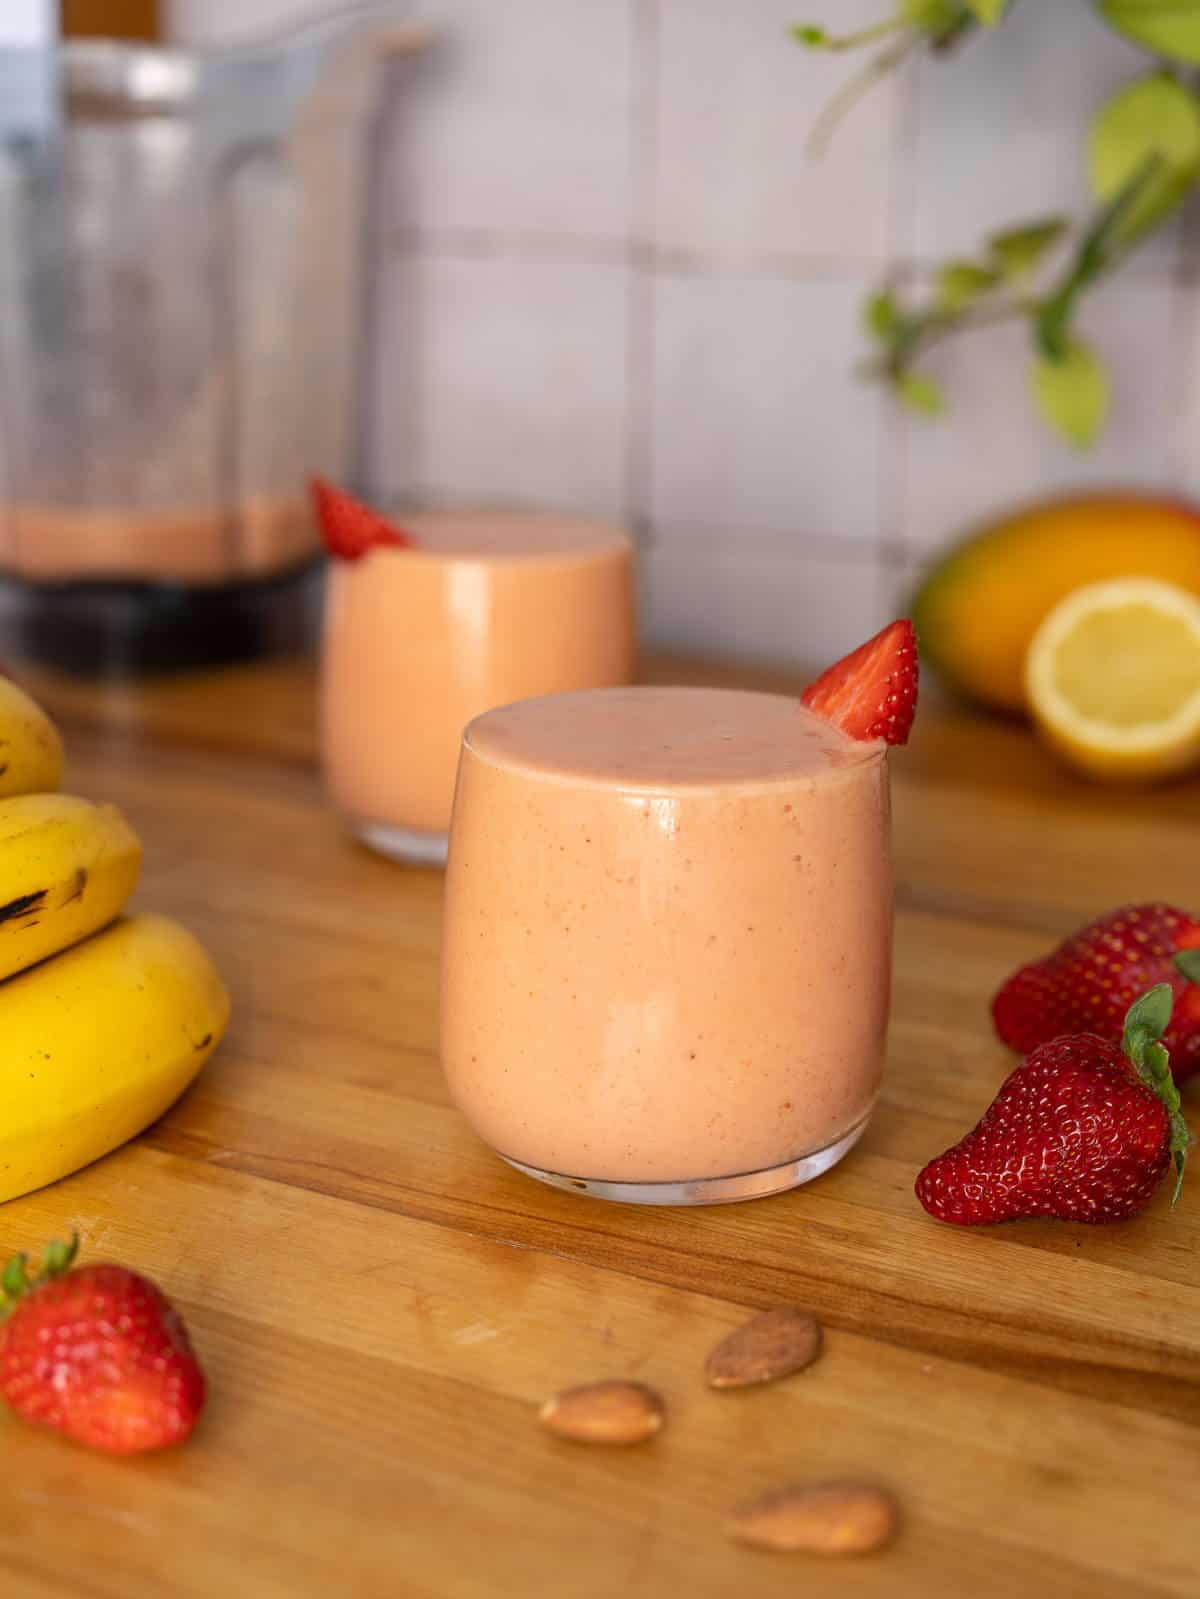 two glasses of strawberry banana mango smoothie served with a blender behind.